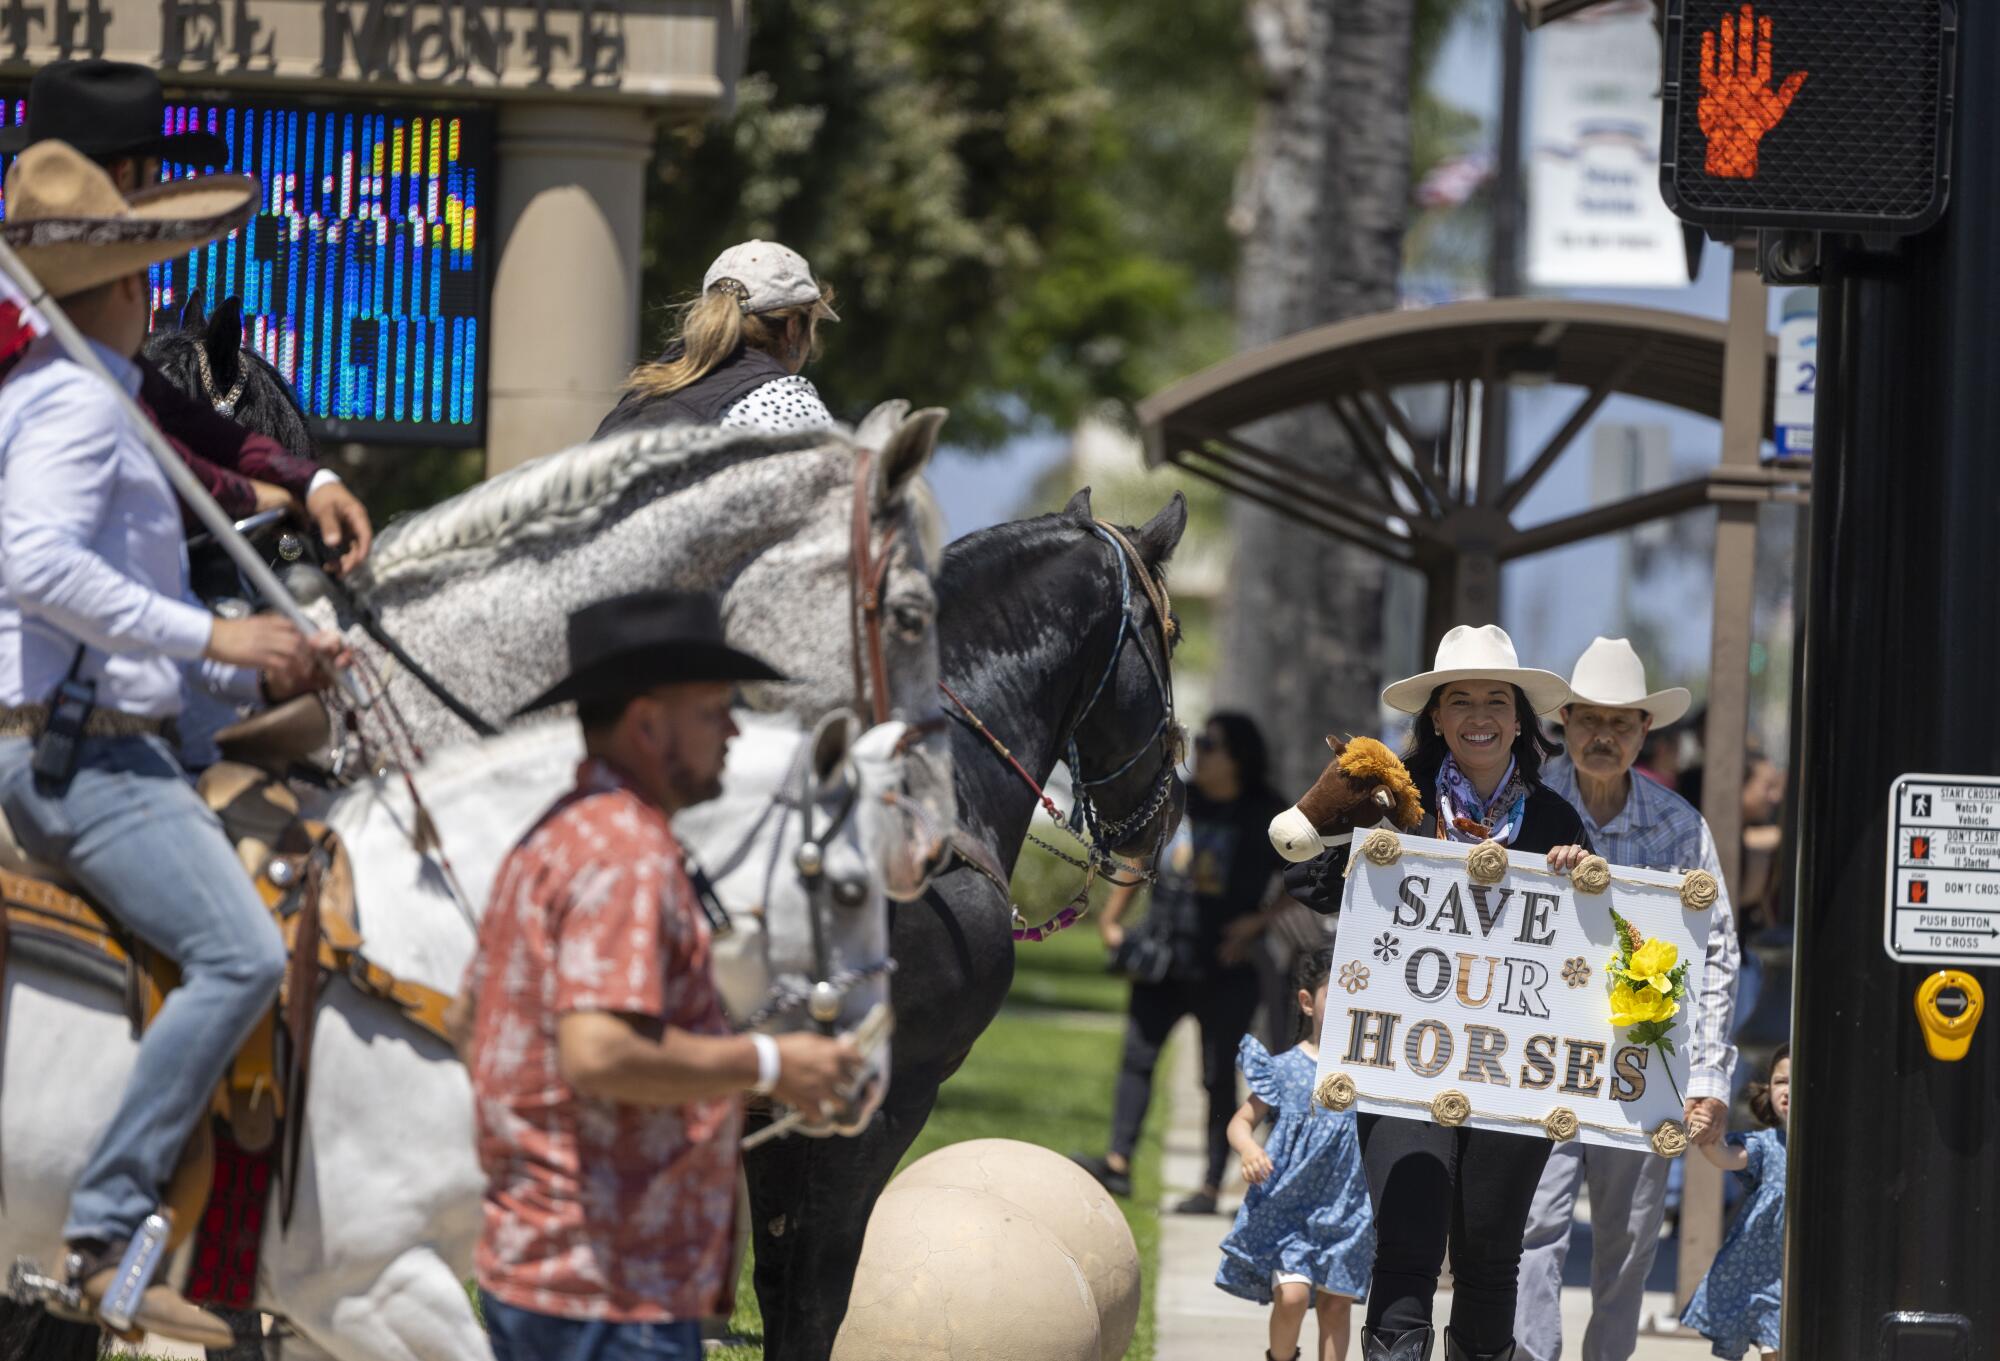 People gather with horses and a sign saying Save Our Horses.